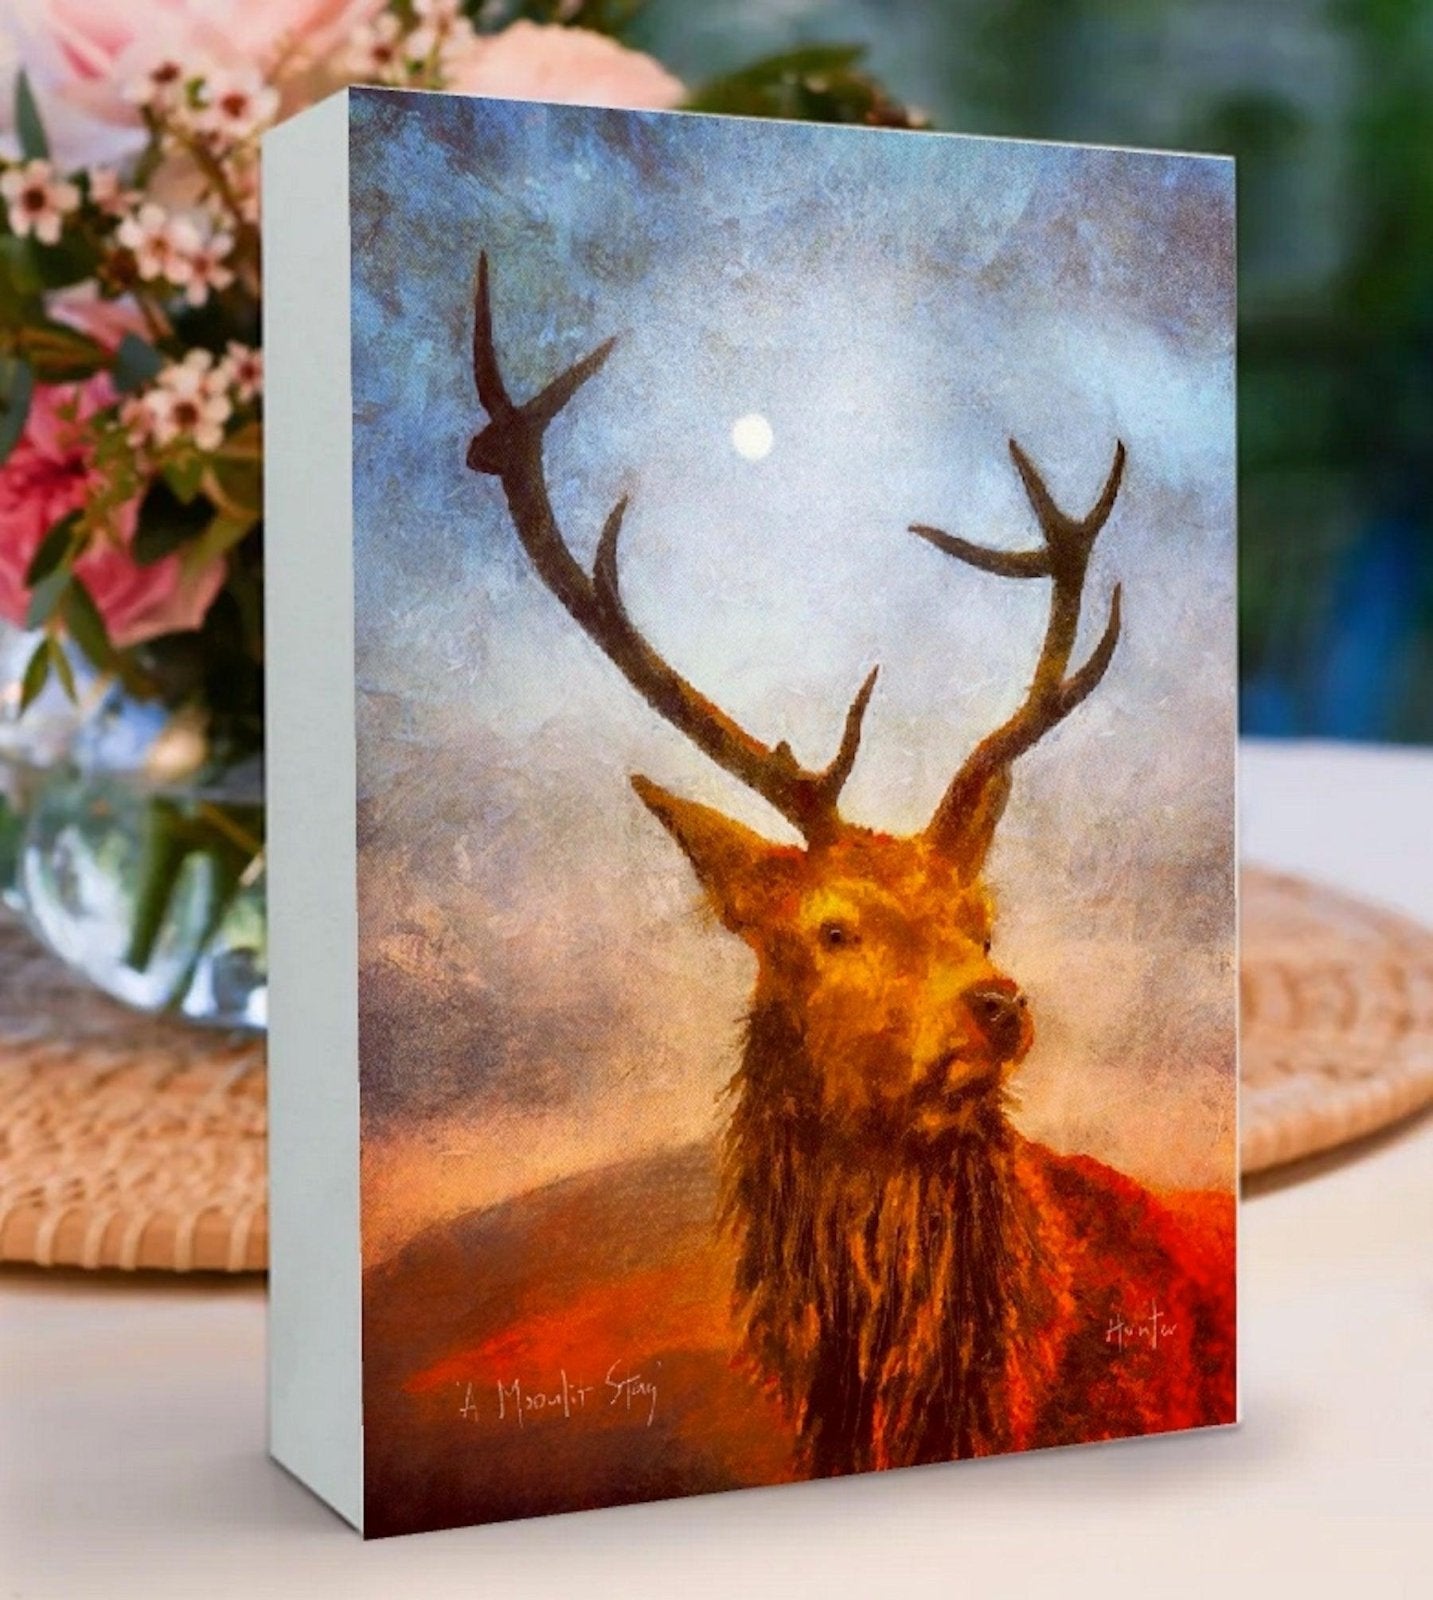 The Thistle And The Bee Wooden Art Block-Wooden Art Blocks-Nature Art Gallery-Paintings, Prints, Homeware, Art Gifts From Scotland By Scottish Artist Kevin Hunter